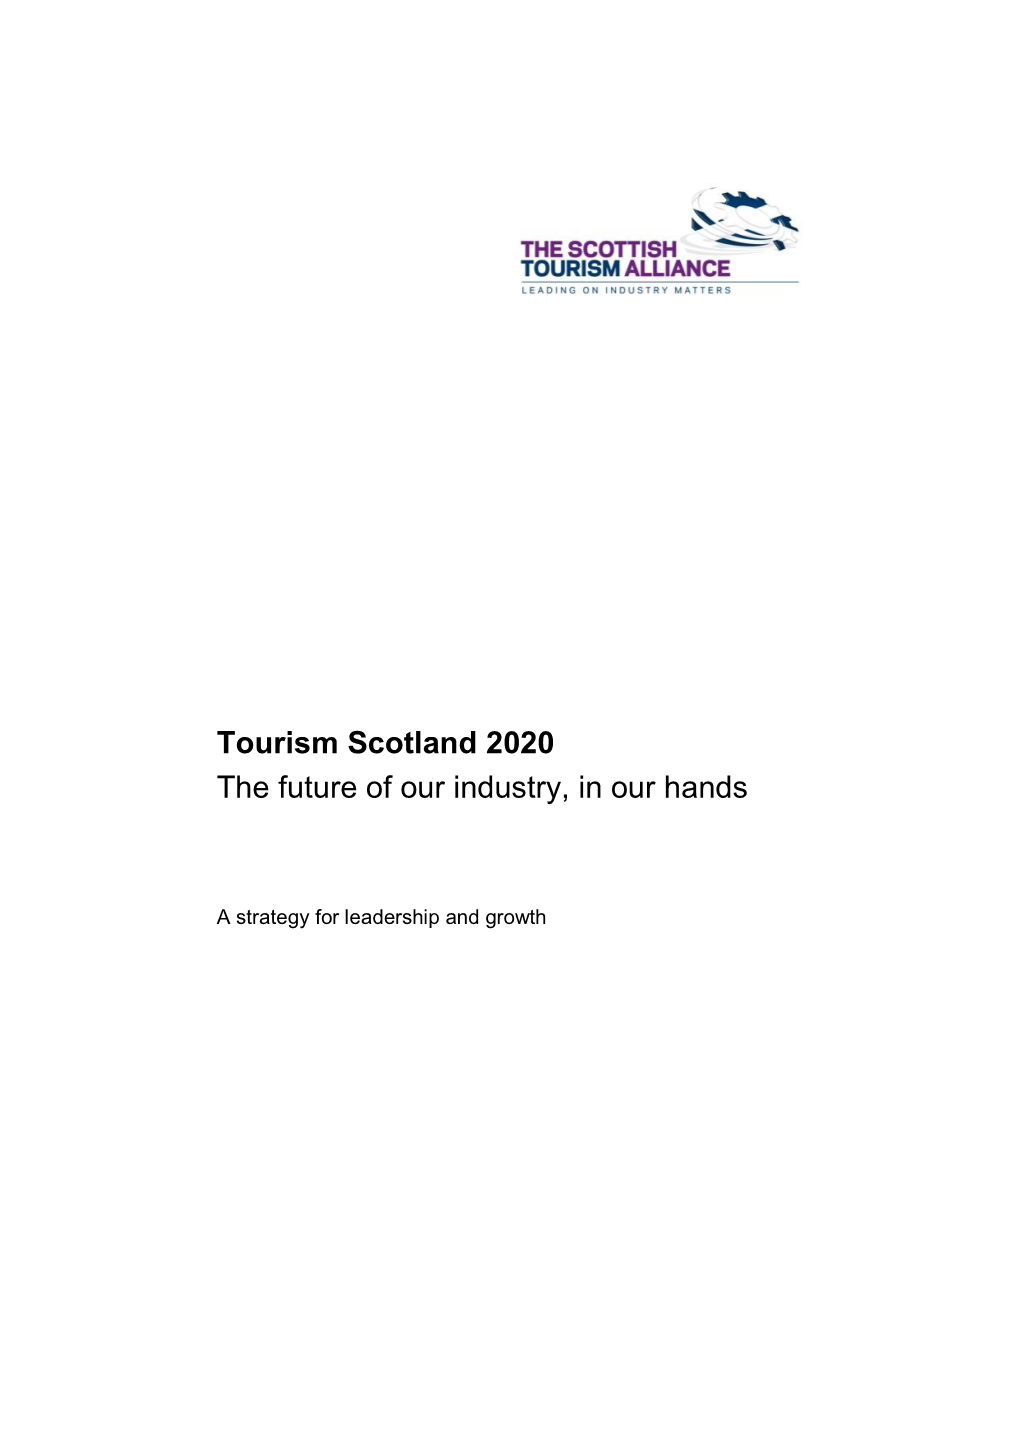 Tourism Scotland 2020 the Future of Our Industry, in Our Hands